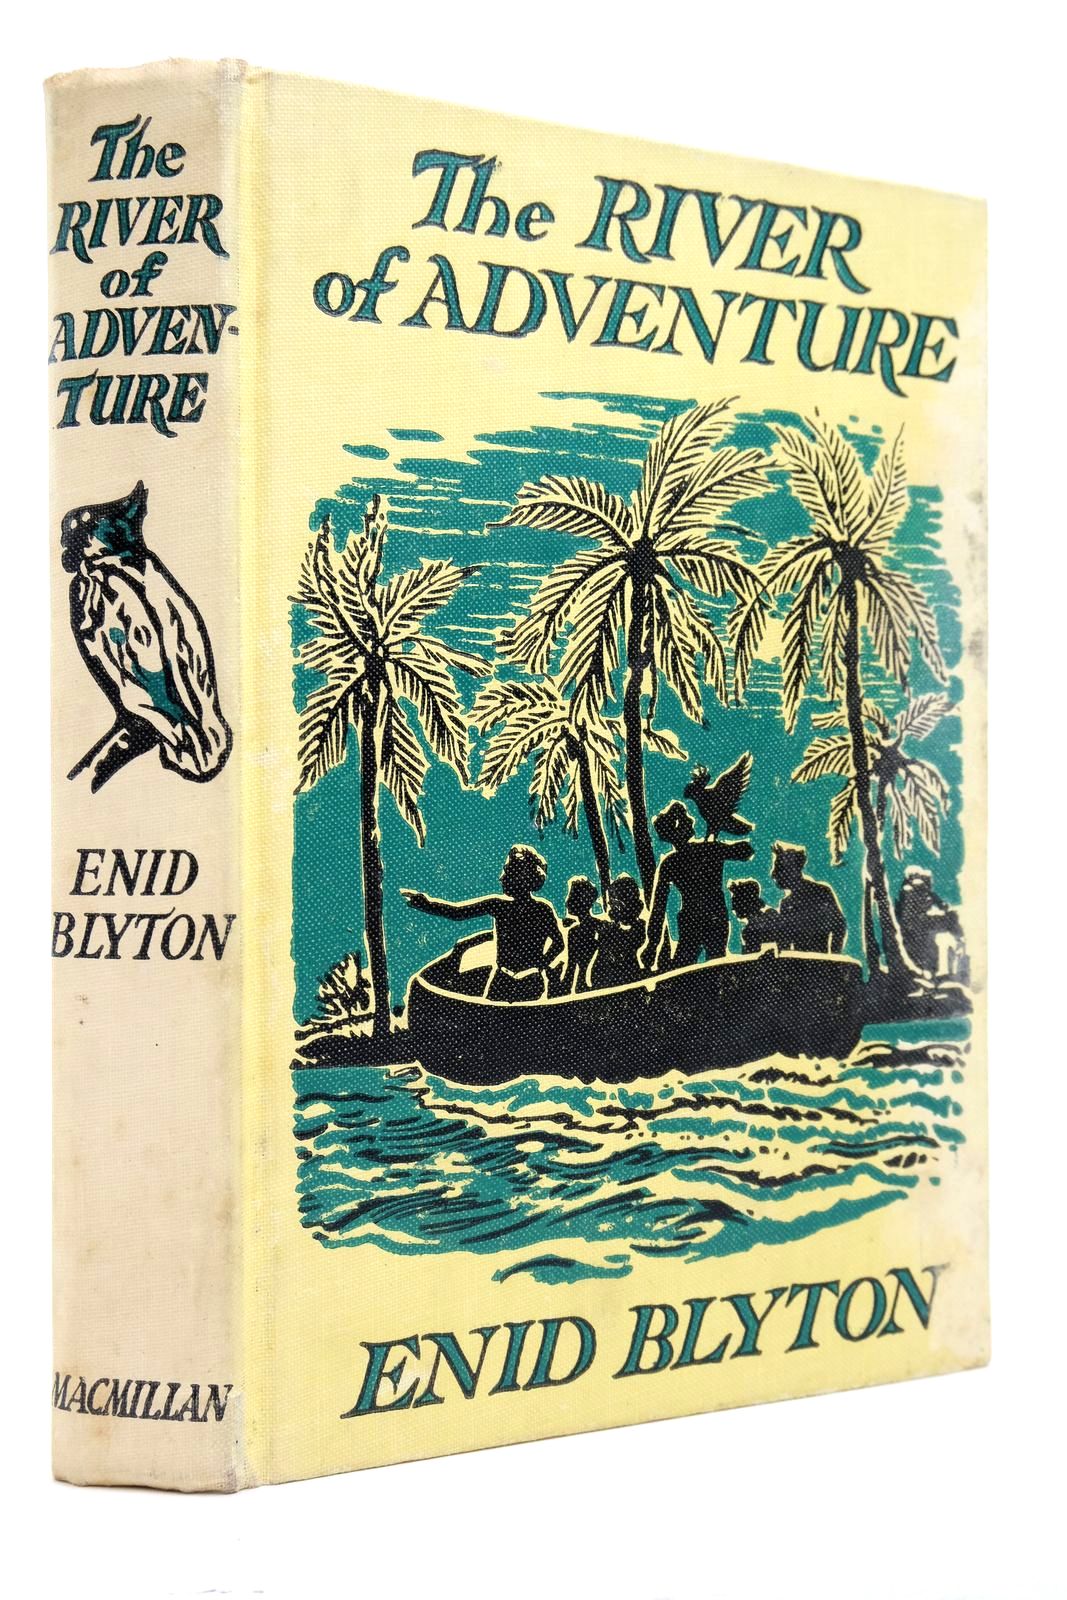 Photo of THE RIVER OF ADVENTURE written by Blyton, Enid illustrated by Tresilian, Stuart published by Macmillan & Co. Ltd. (STOCK CODE: 2140459)  for sale by Stella & Rose's Books